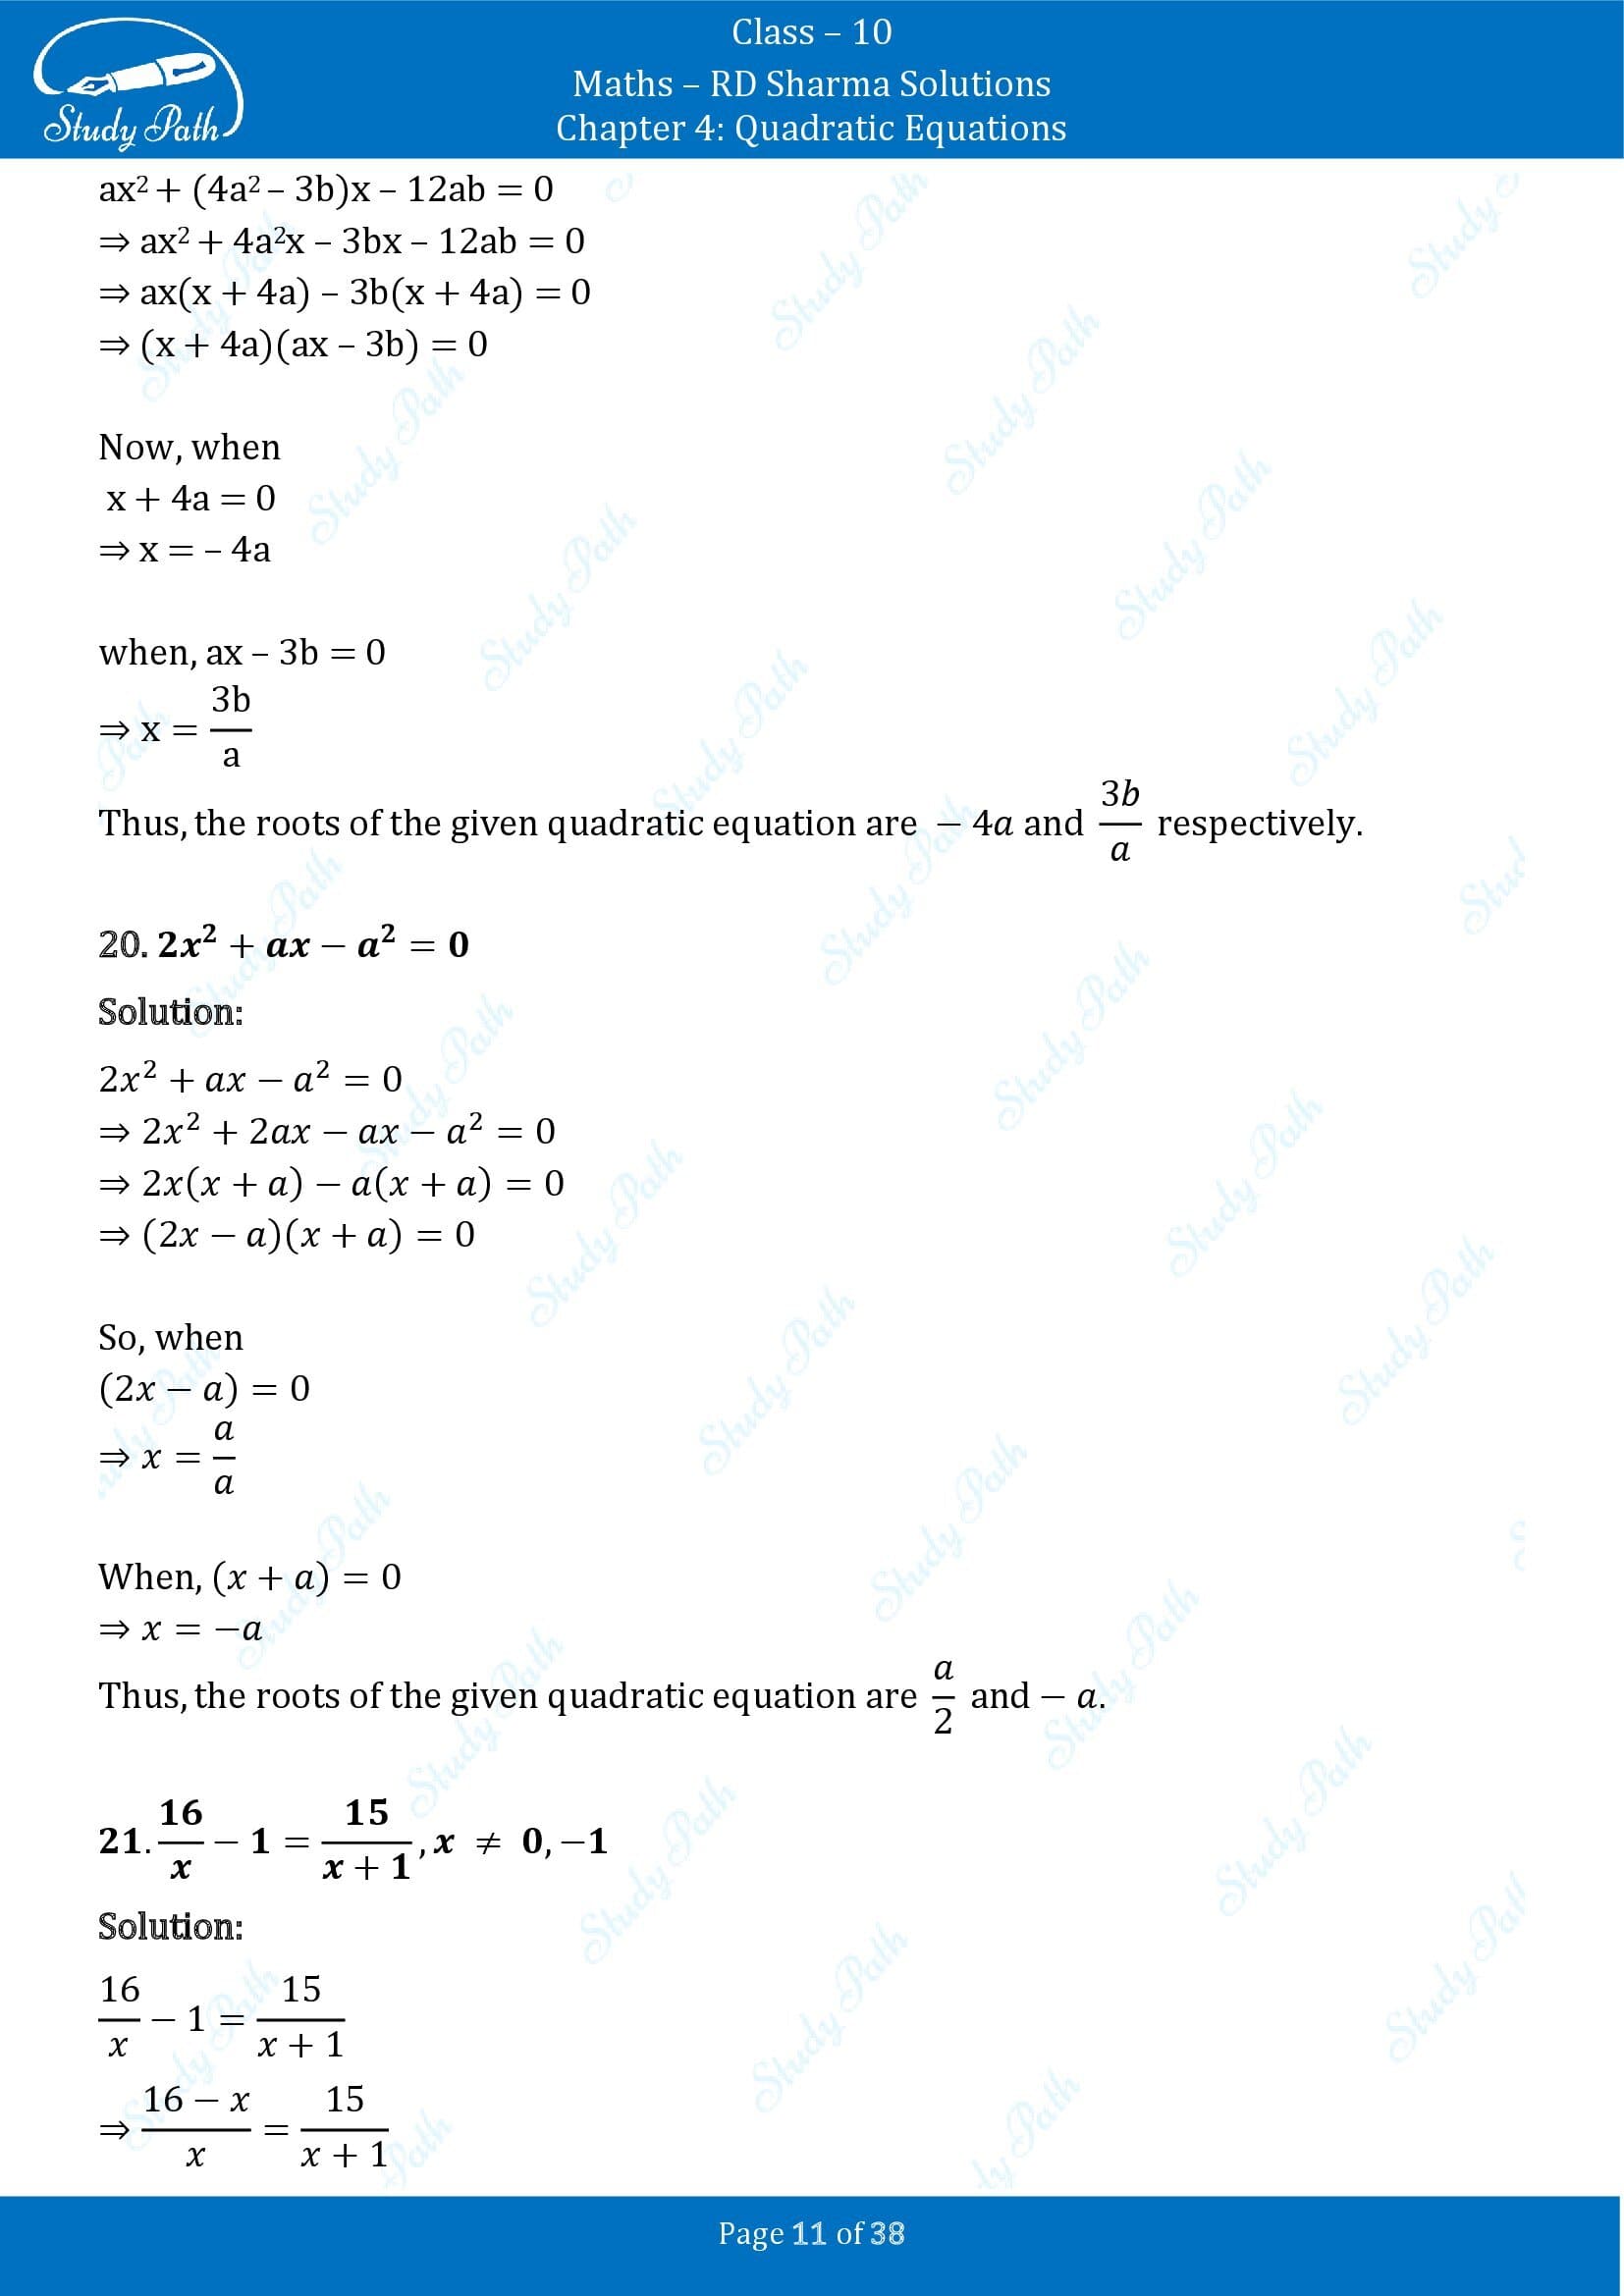 RD Sharma Solutions Class 10 Chapter 4 Quadratic Equations Exercise 4.3 00011